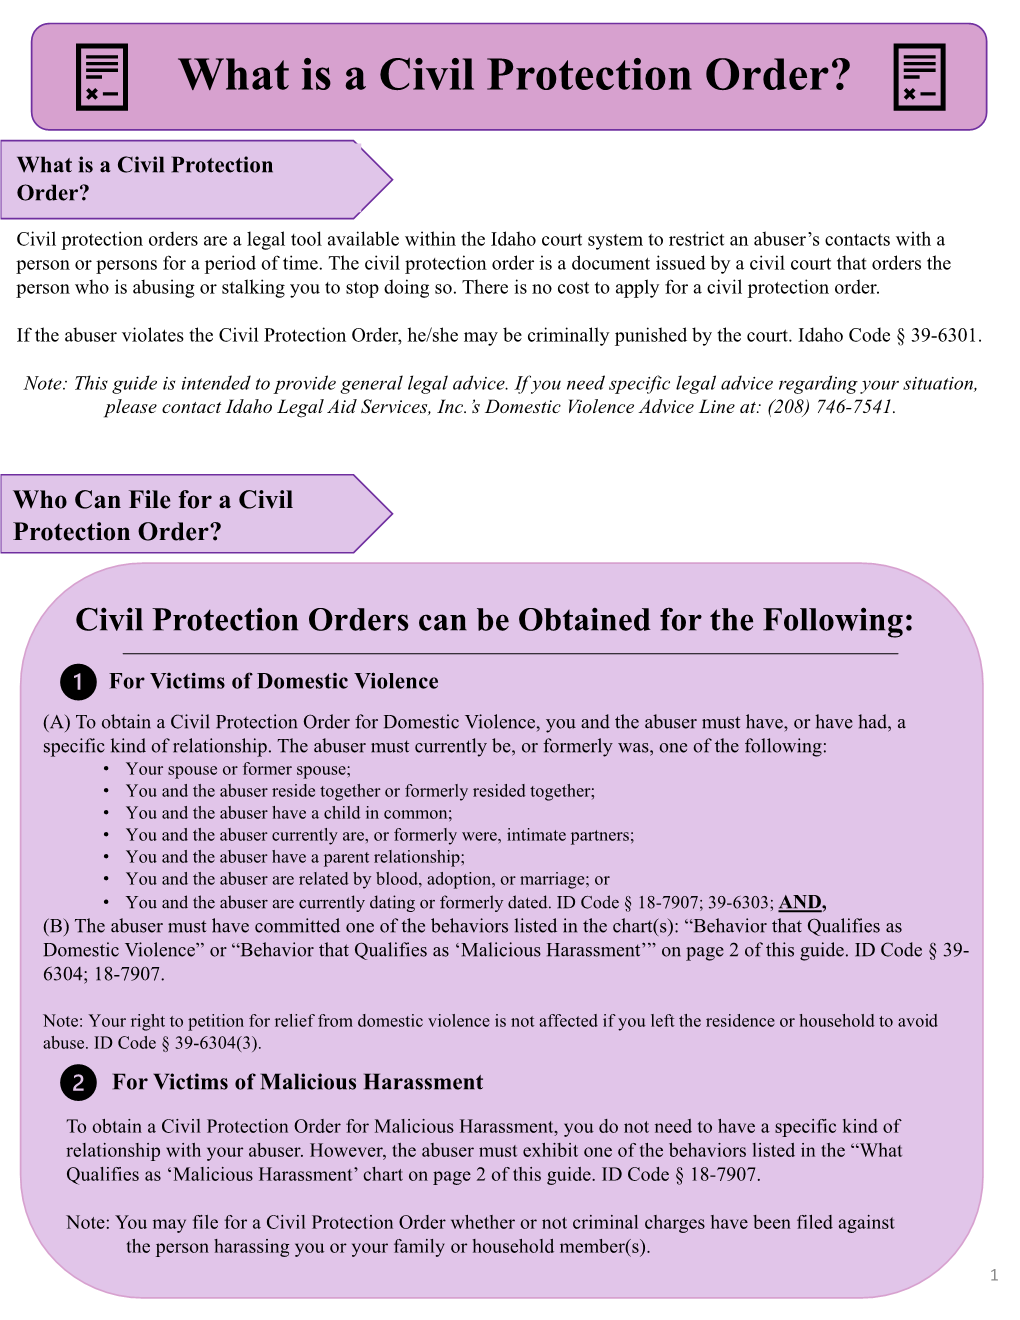 Civil Protection Order Guide